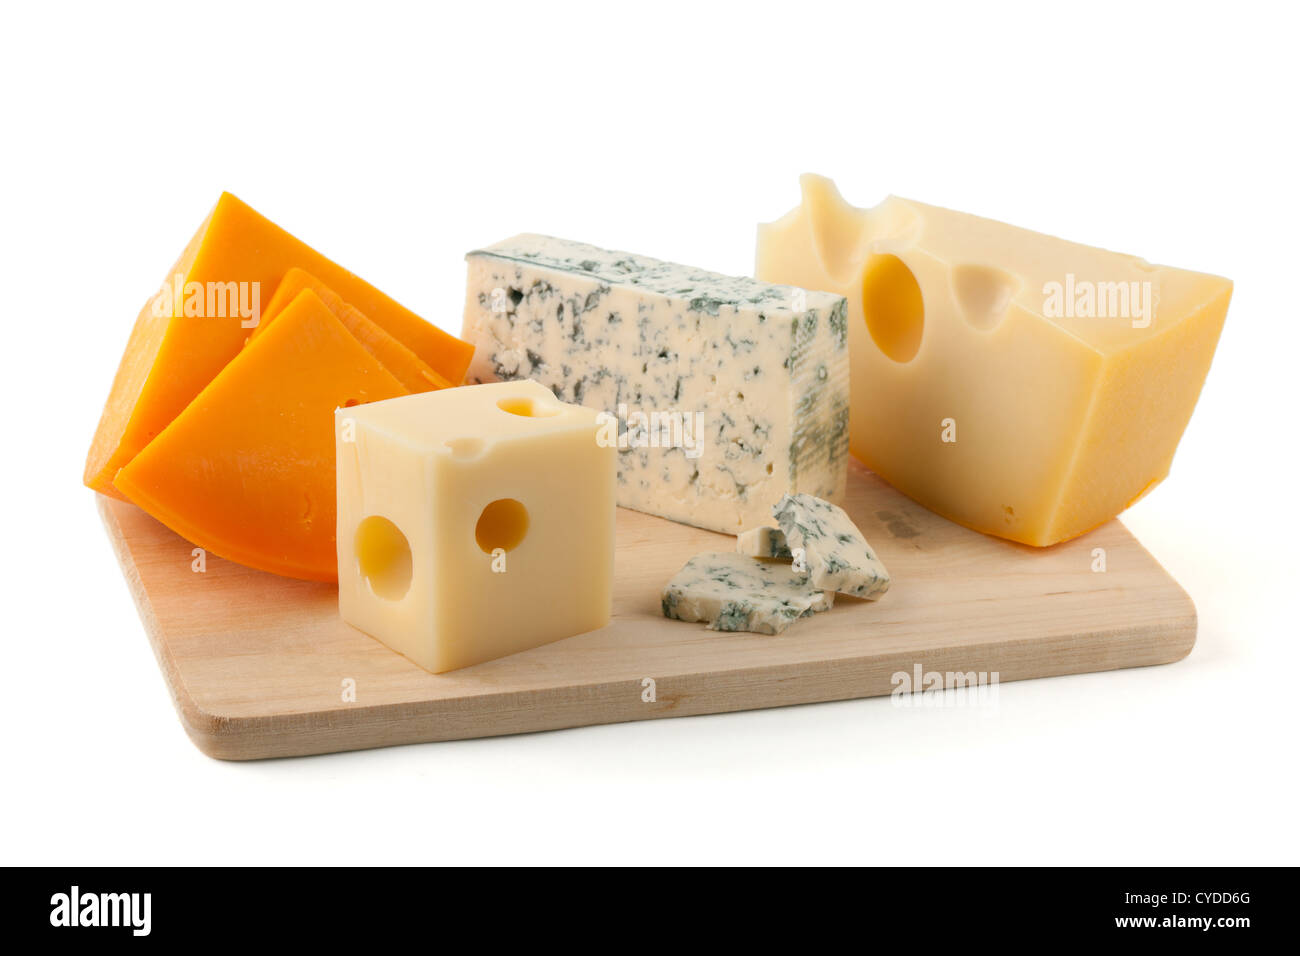 Cheese board. Isolated on white background Stock Photo